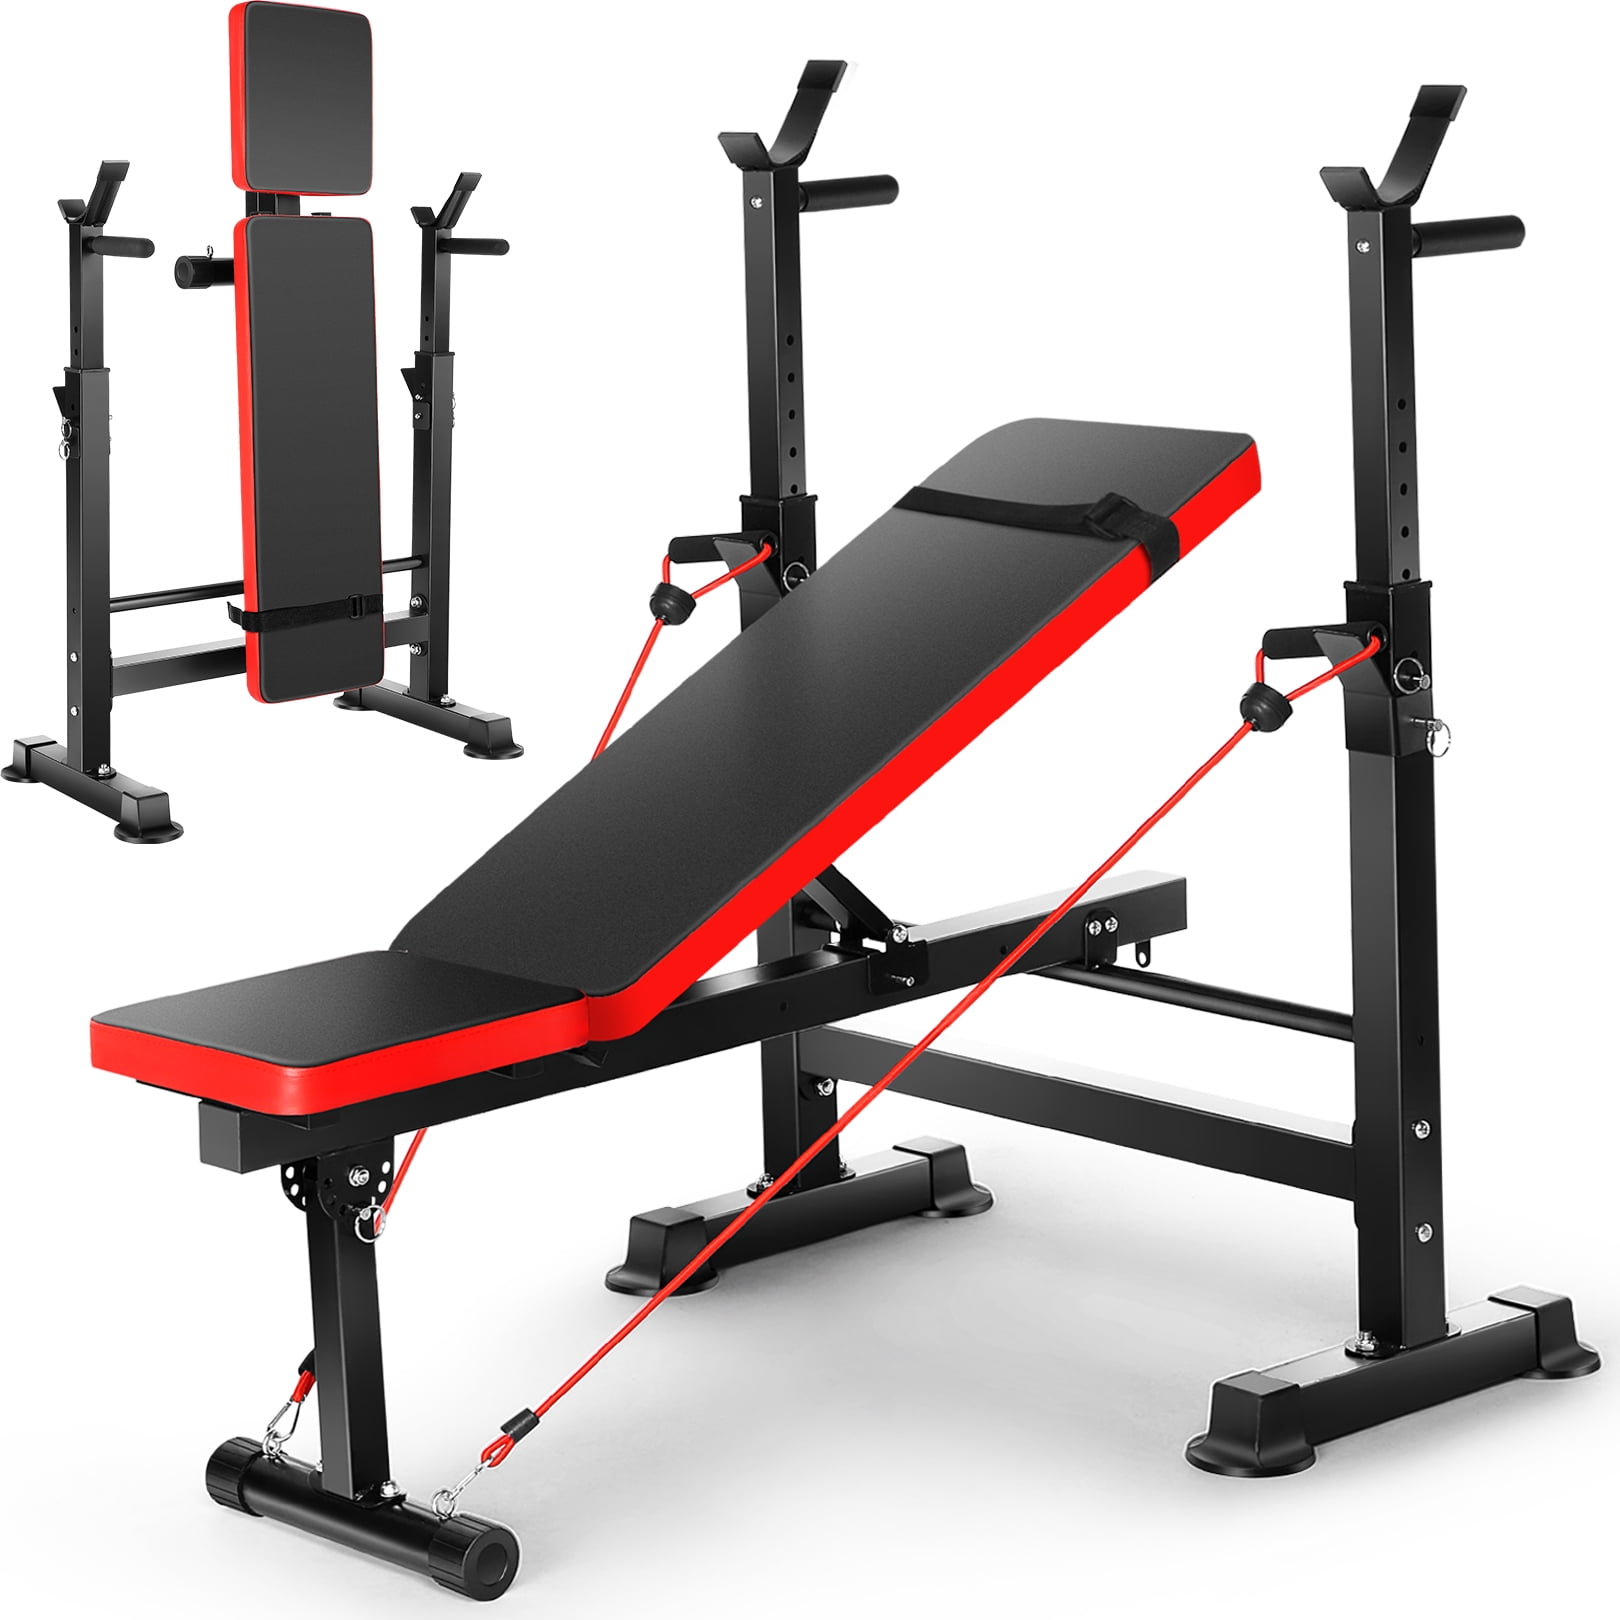 VIBESPARK Adjustable Weight Bench 600lbs 4-in-1 Foldable Workout